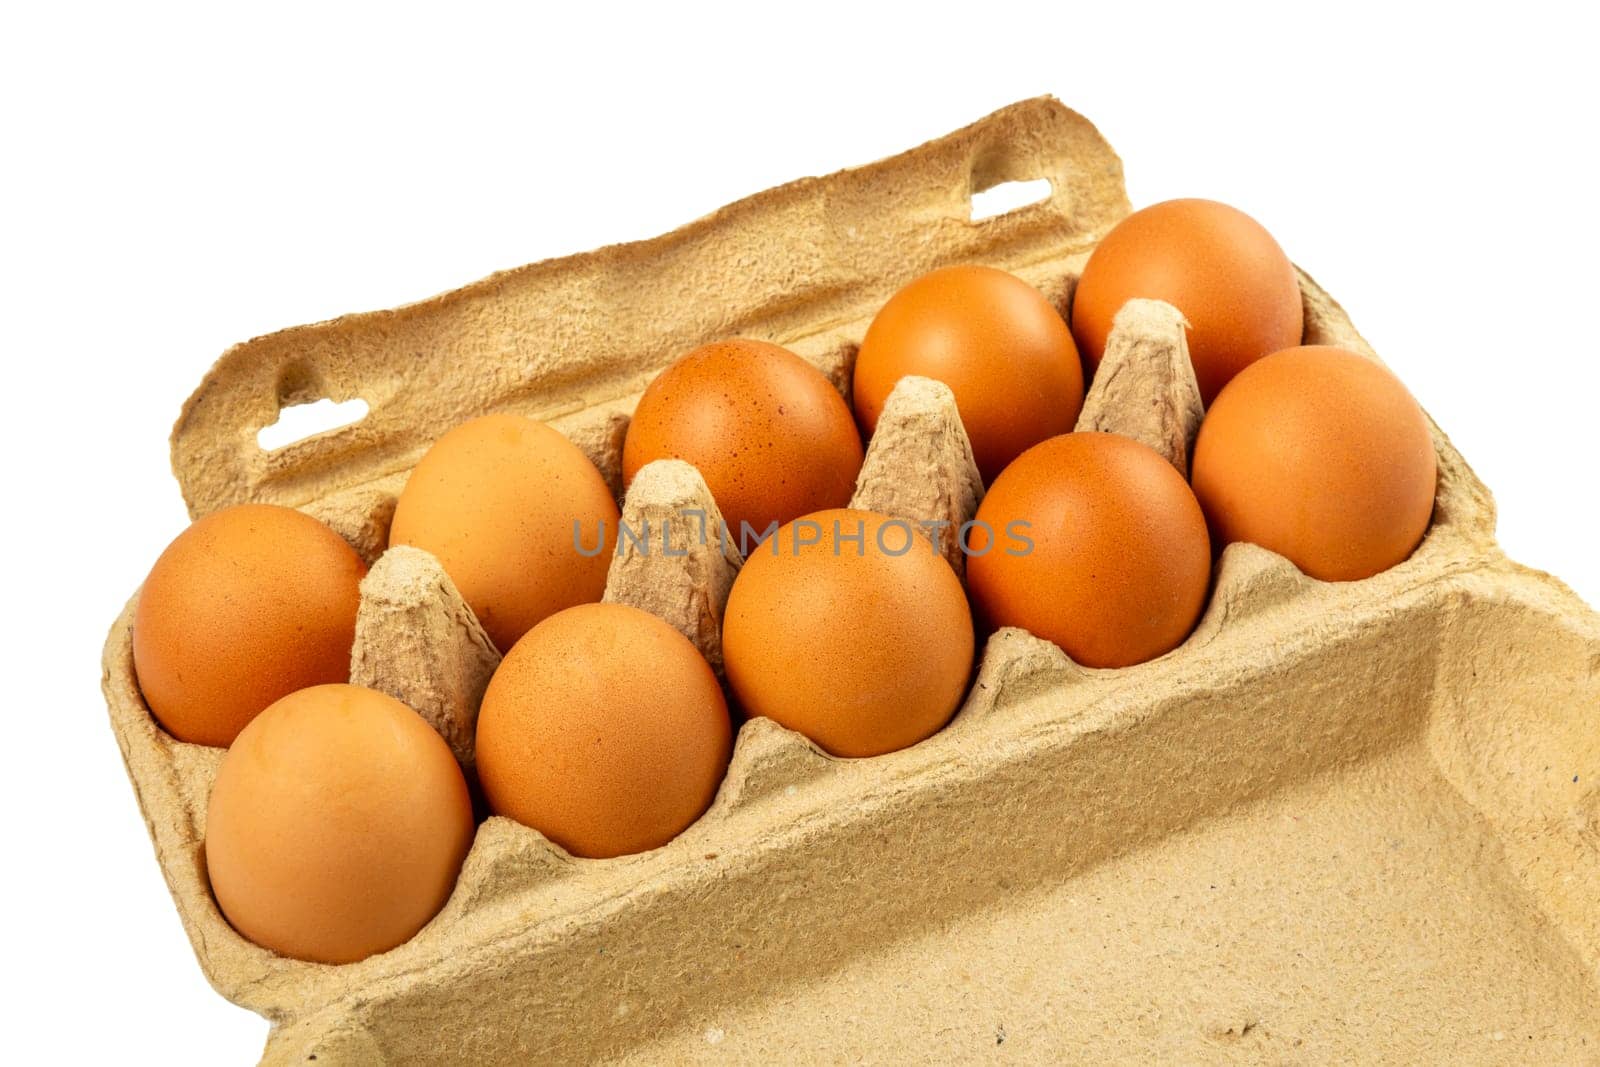 Ten eggs in packaging paper mould box isolated on white background.